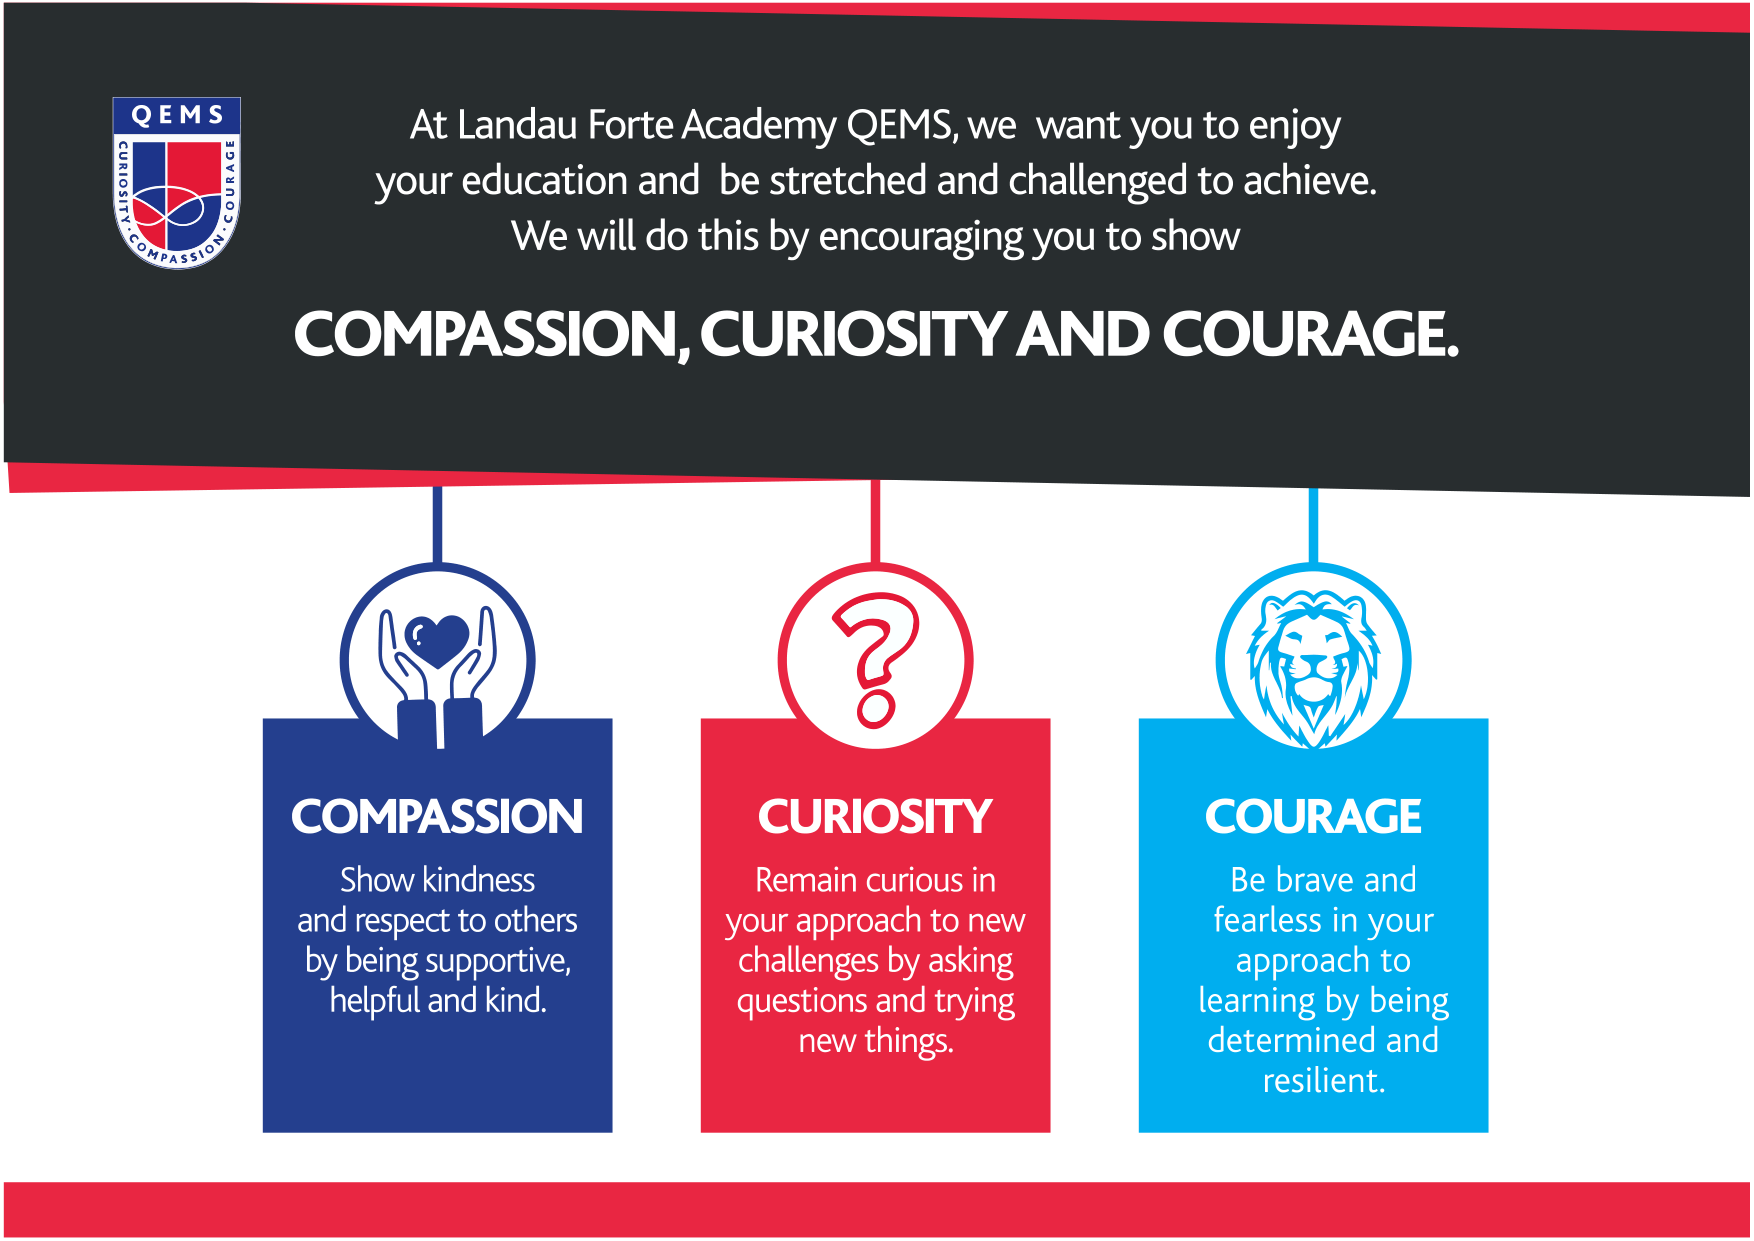 Our Visions and Values: Compassion, Curiosity & Courage